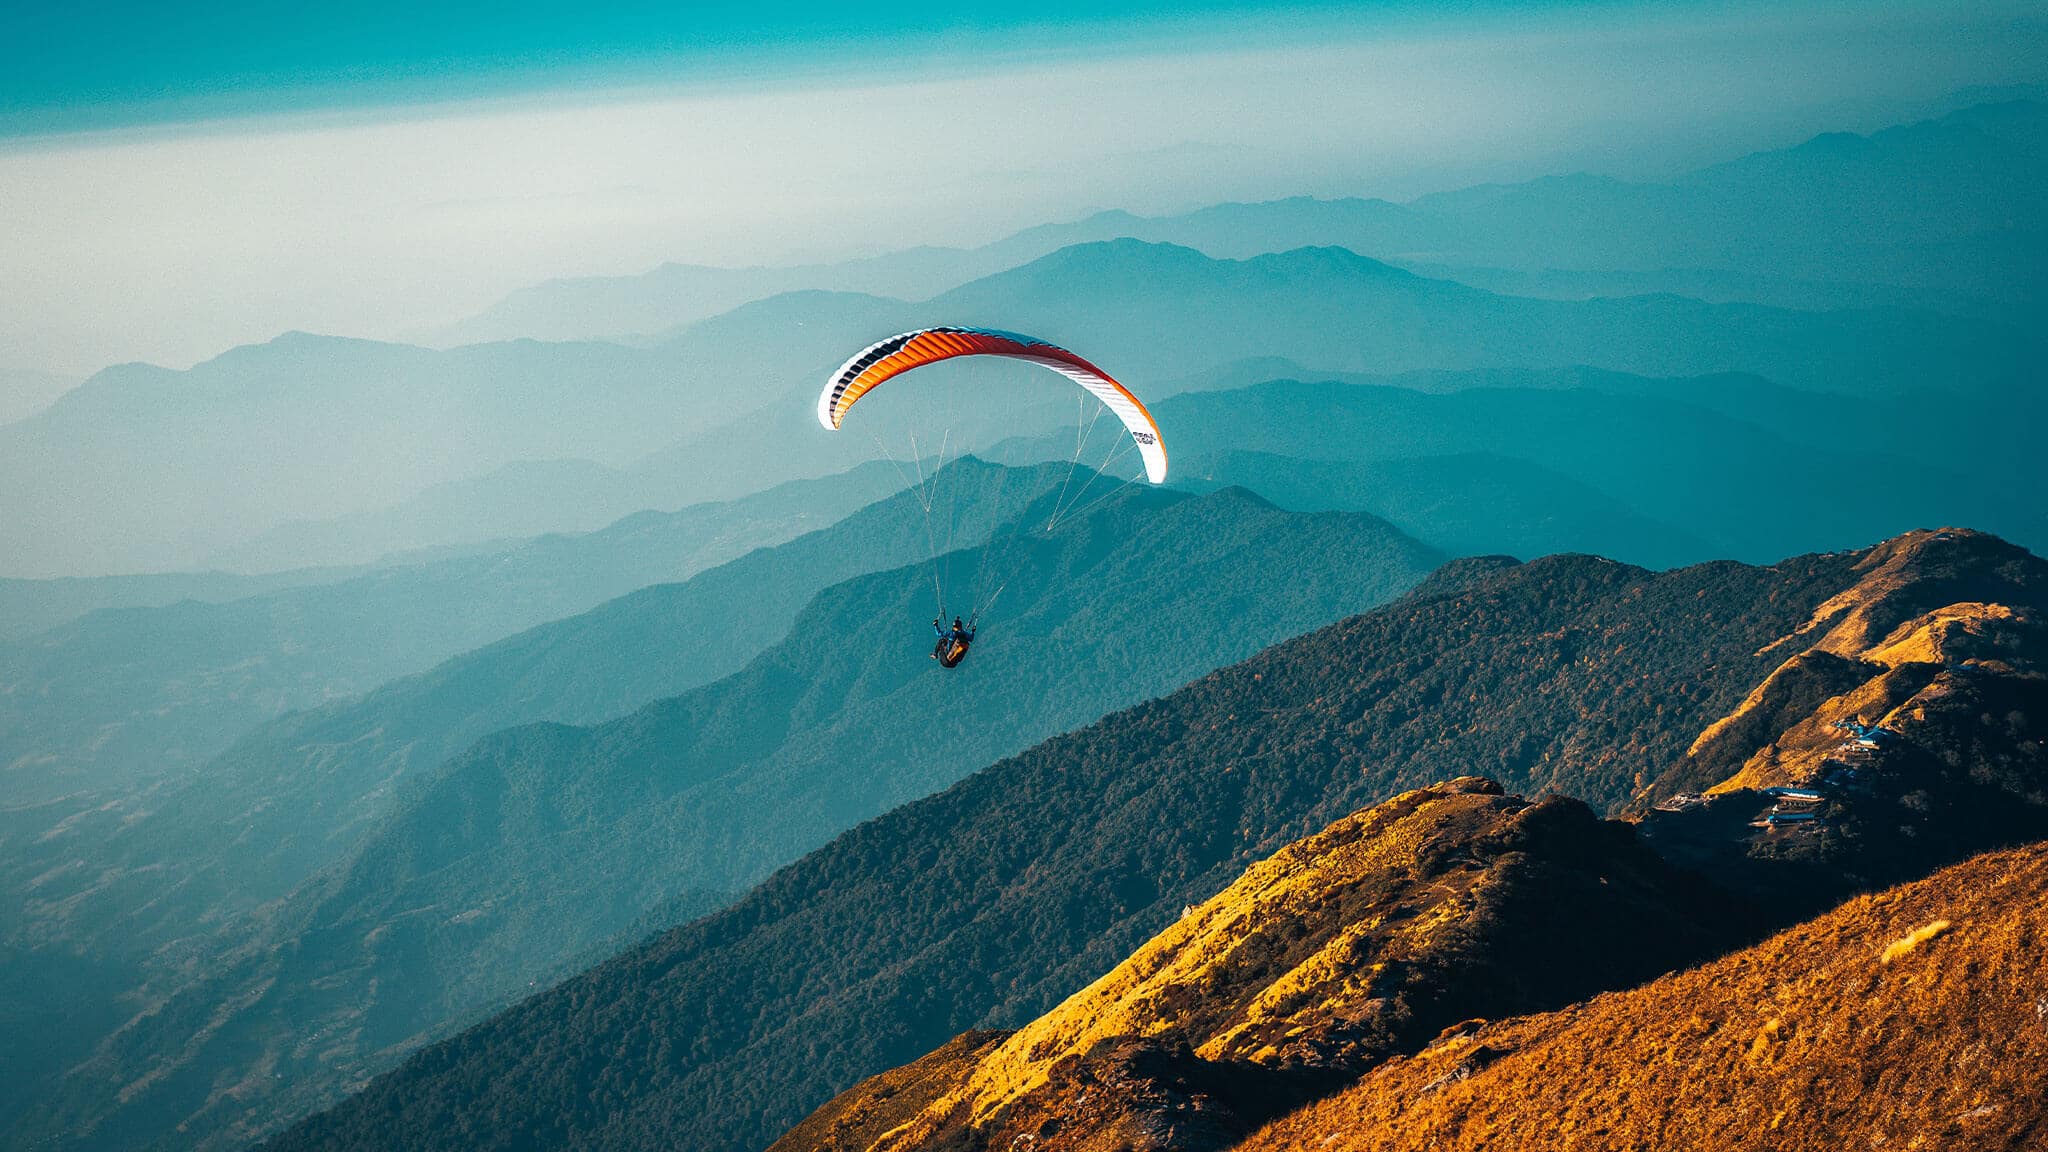 Wide angle shot of paraglider over forested mountains